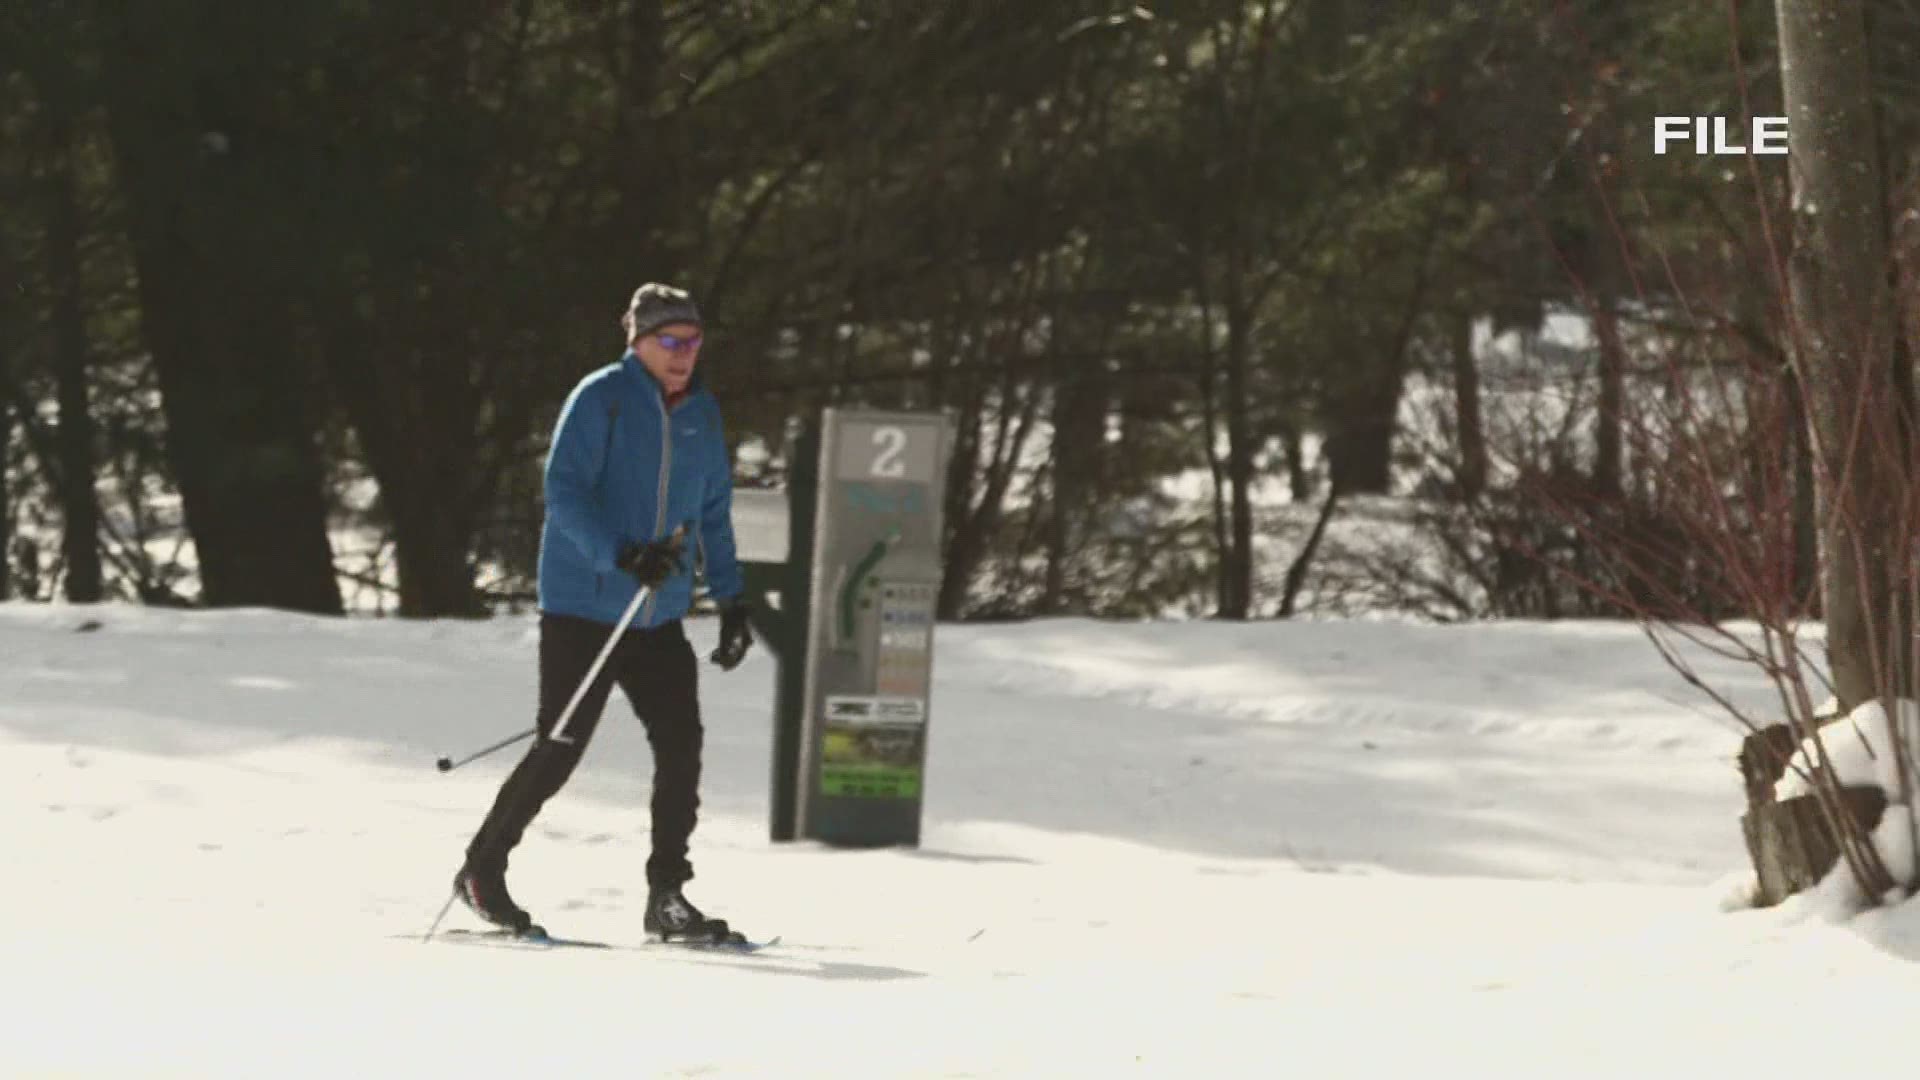 The winter sports industry is expecting a similar boom in business after this weekend's storm.